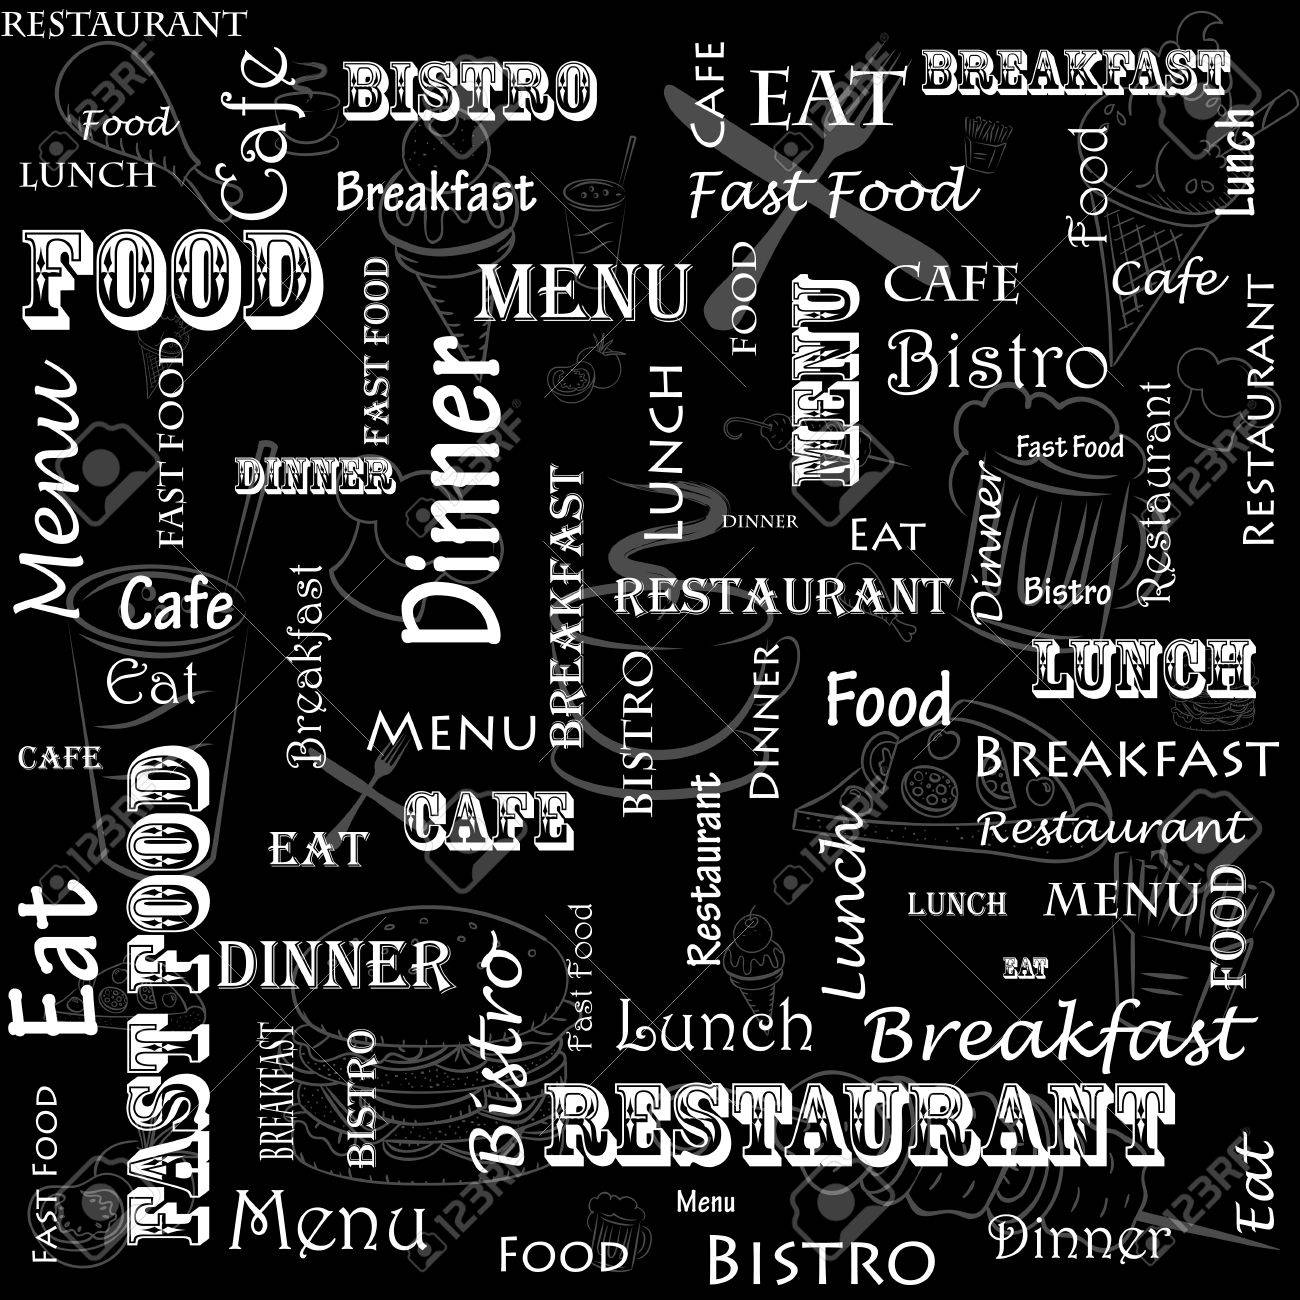 Wallpaper Menu For Pizzerias And Restaurants Image Products